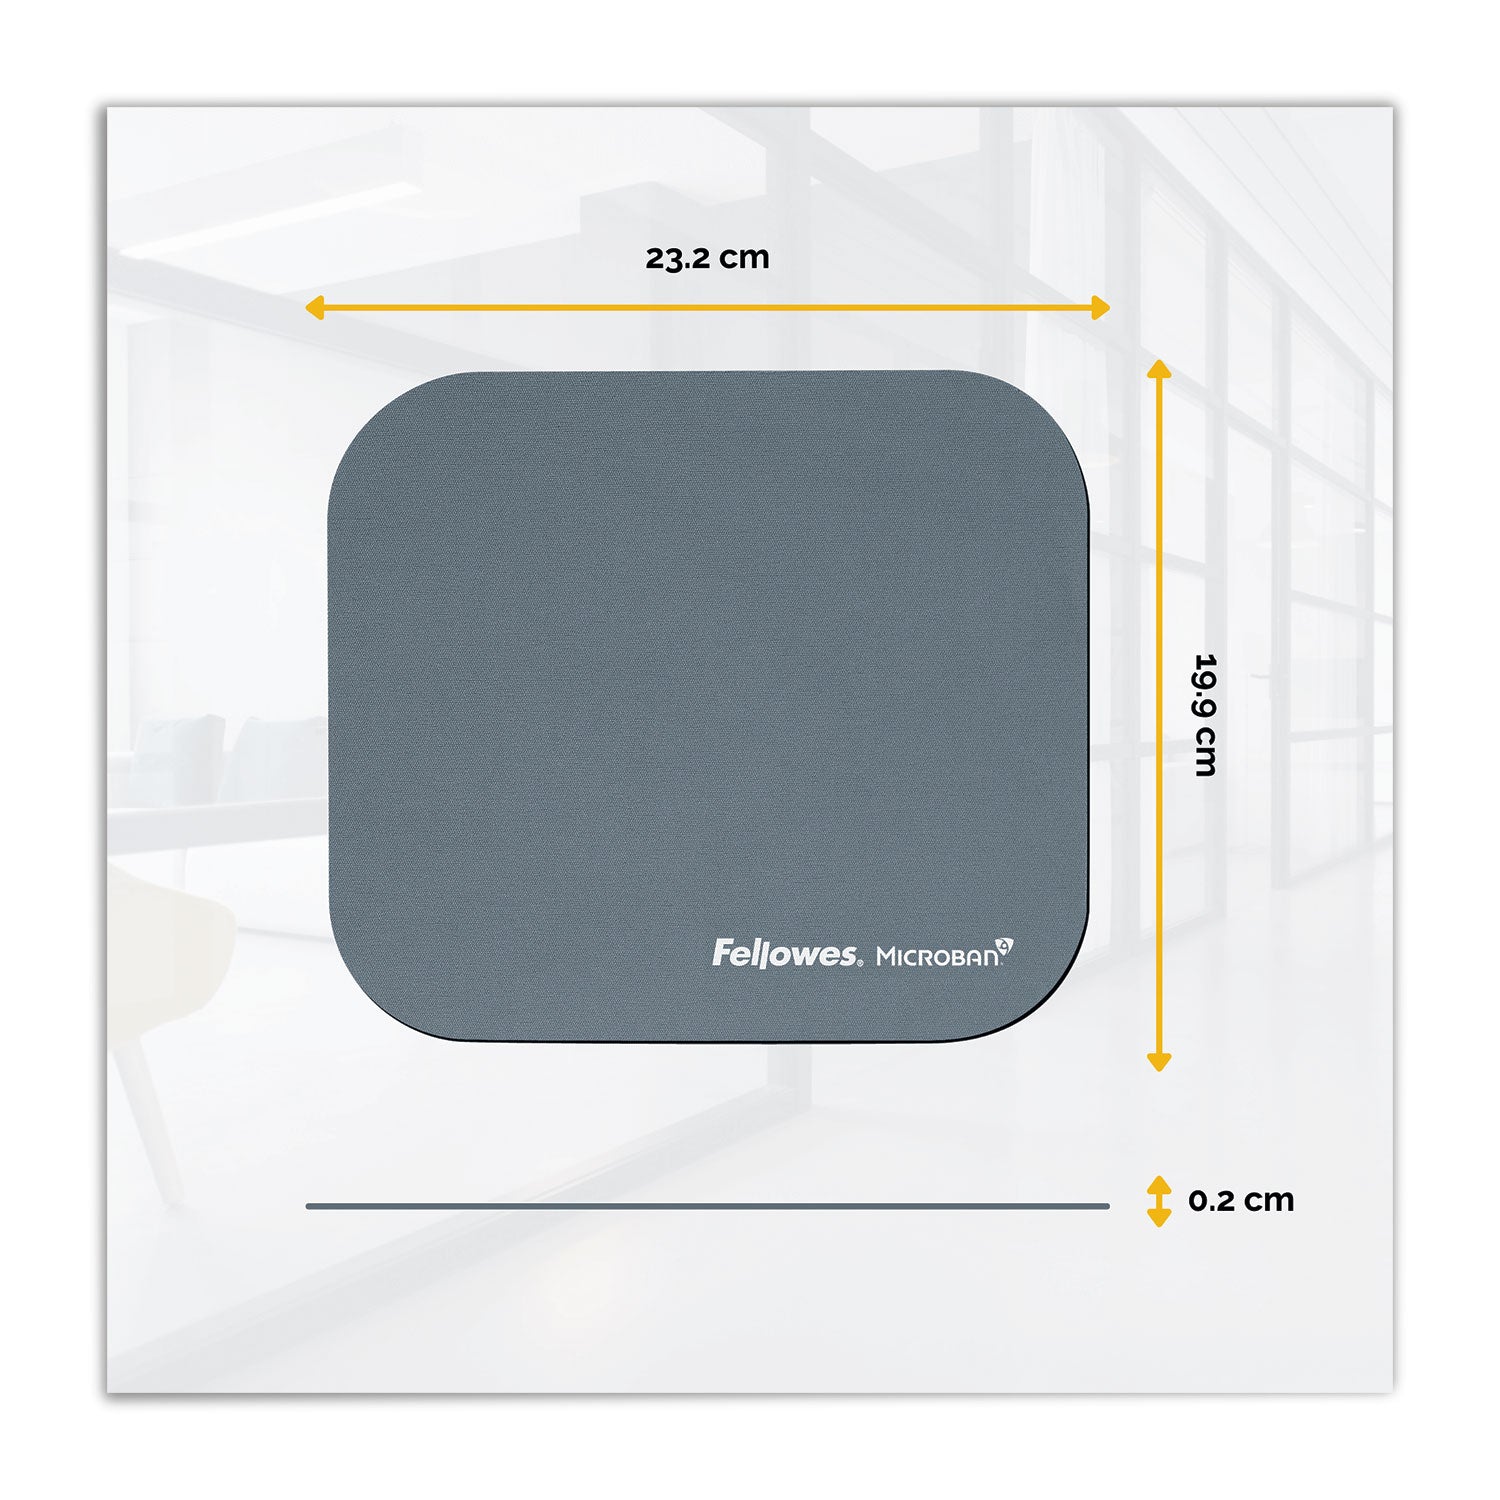 Mouse Pad with Microban Protection, 9 x 8, Graphite - 